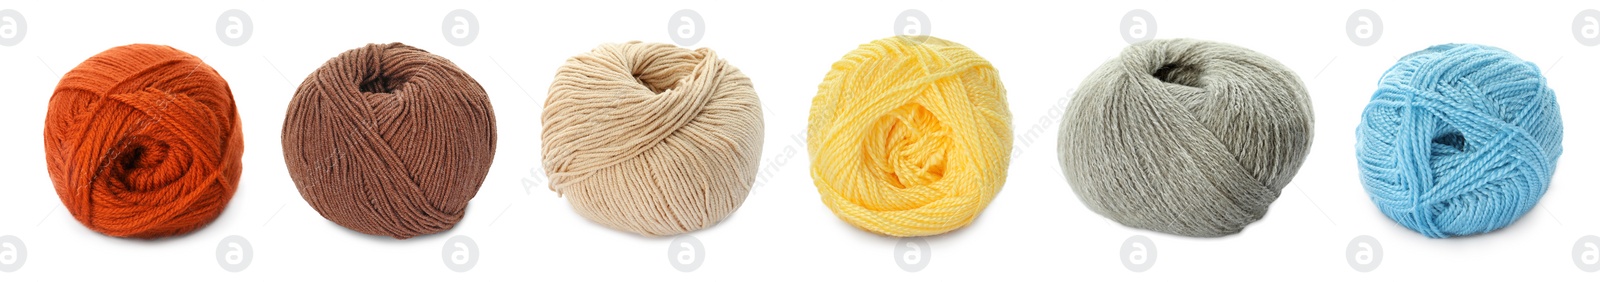 Image of Collage with balls of colorful yarns on white background